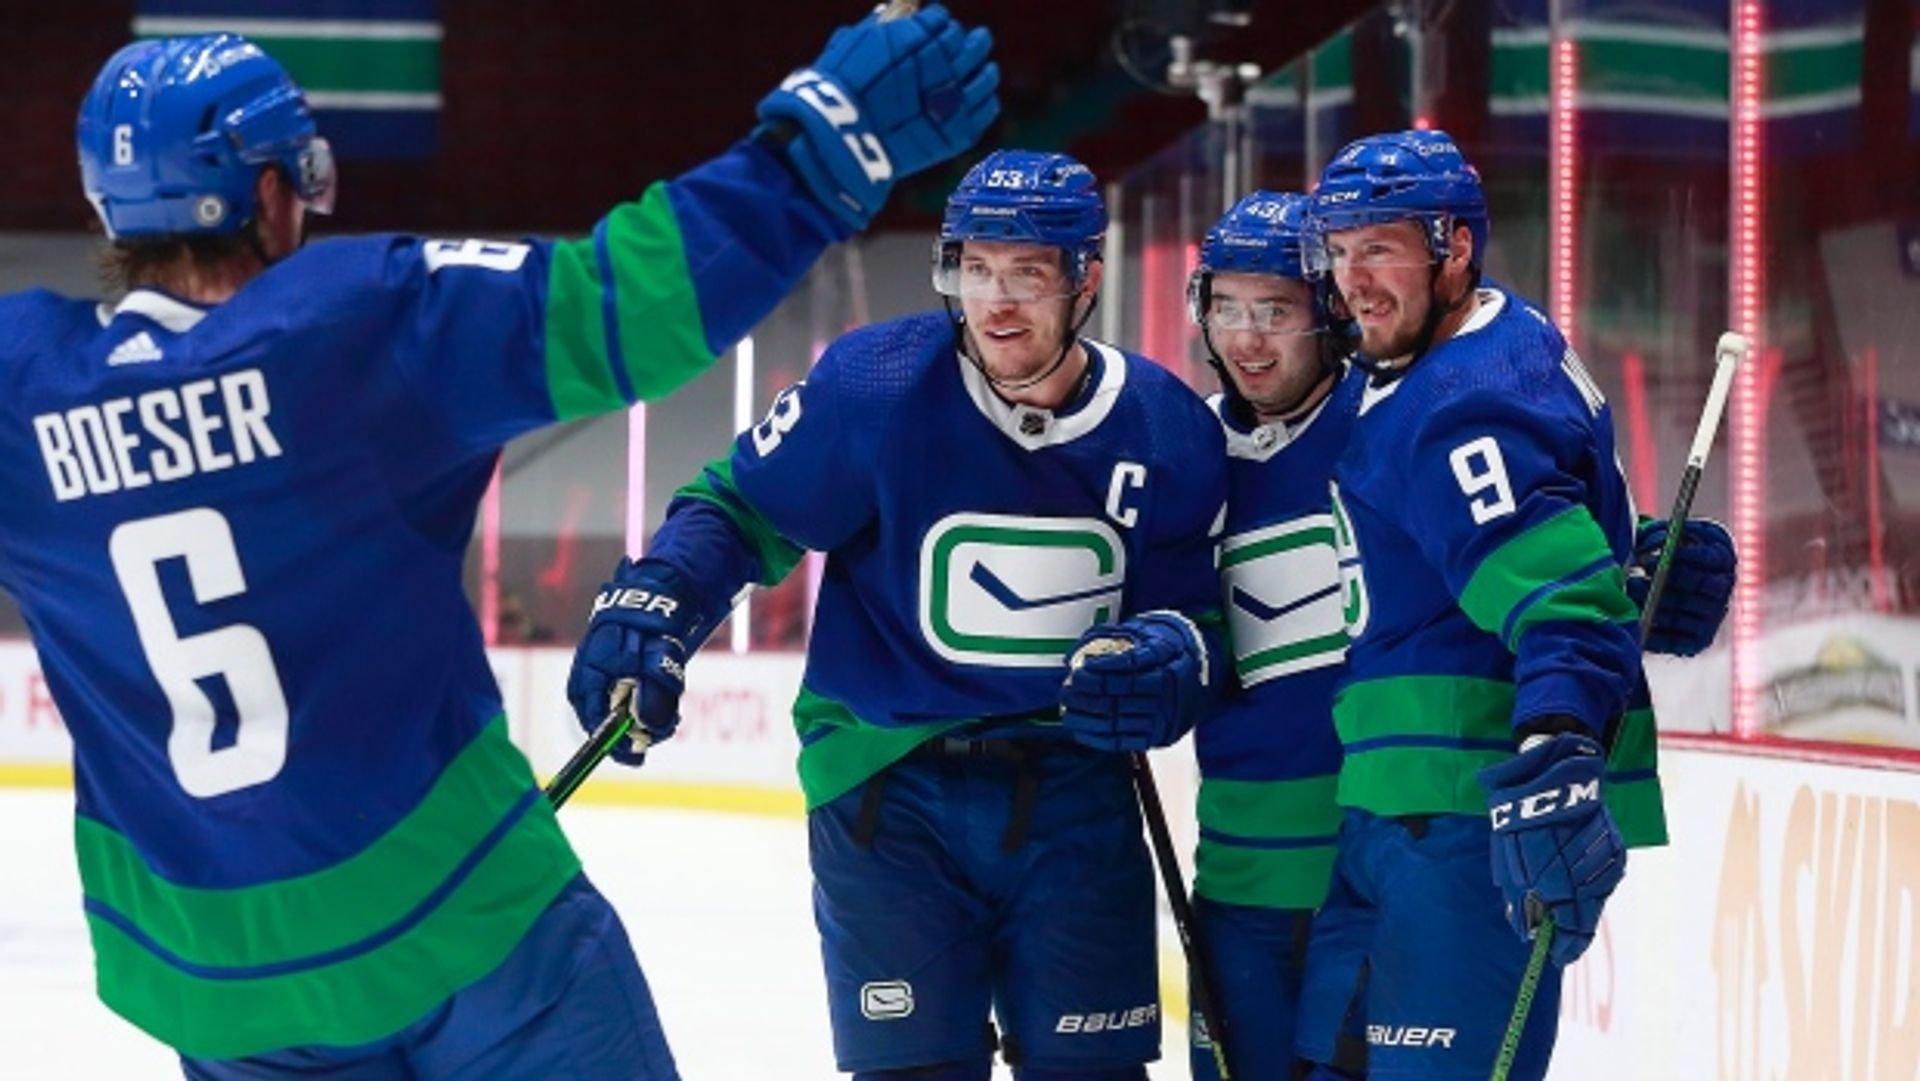 Value in Vancouver As Surging Canucks A Good Bet to Down Canadiens Again